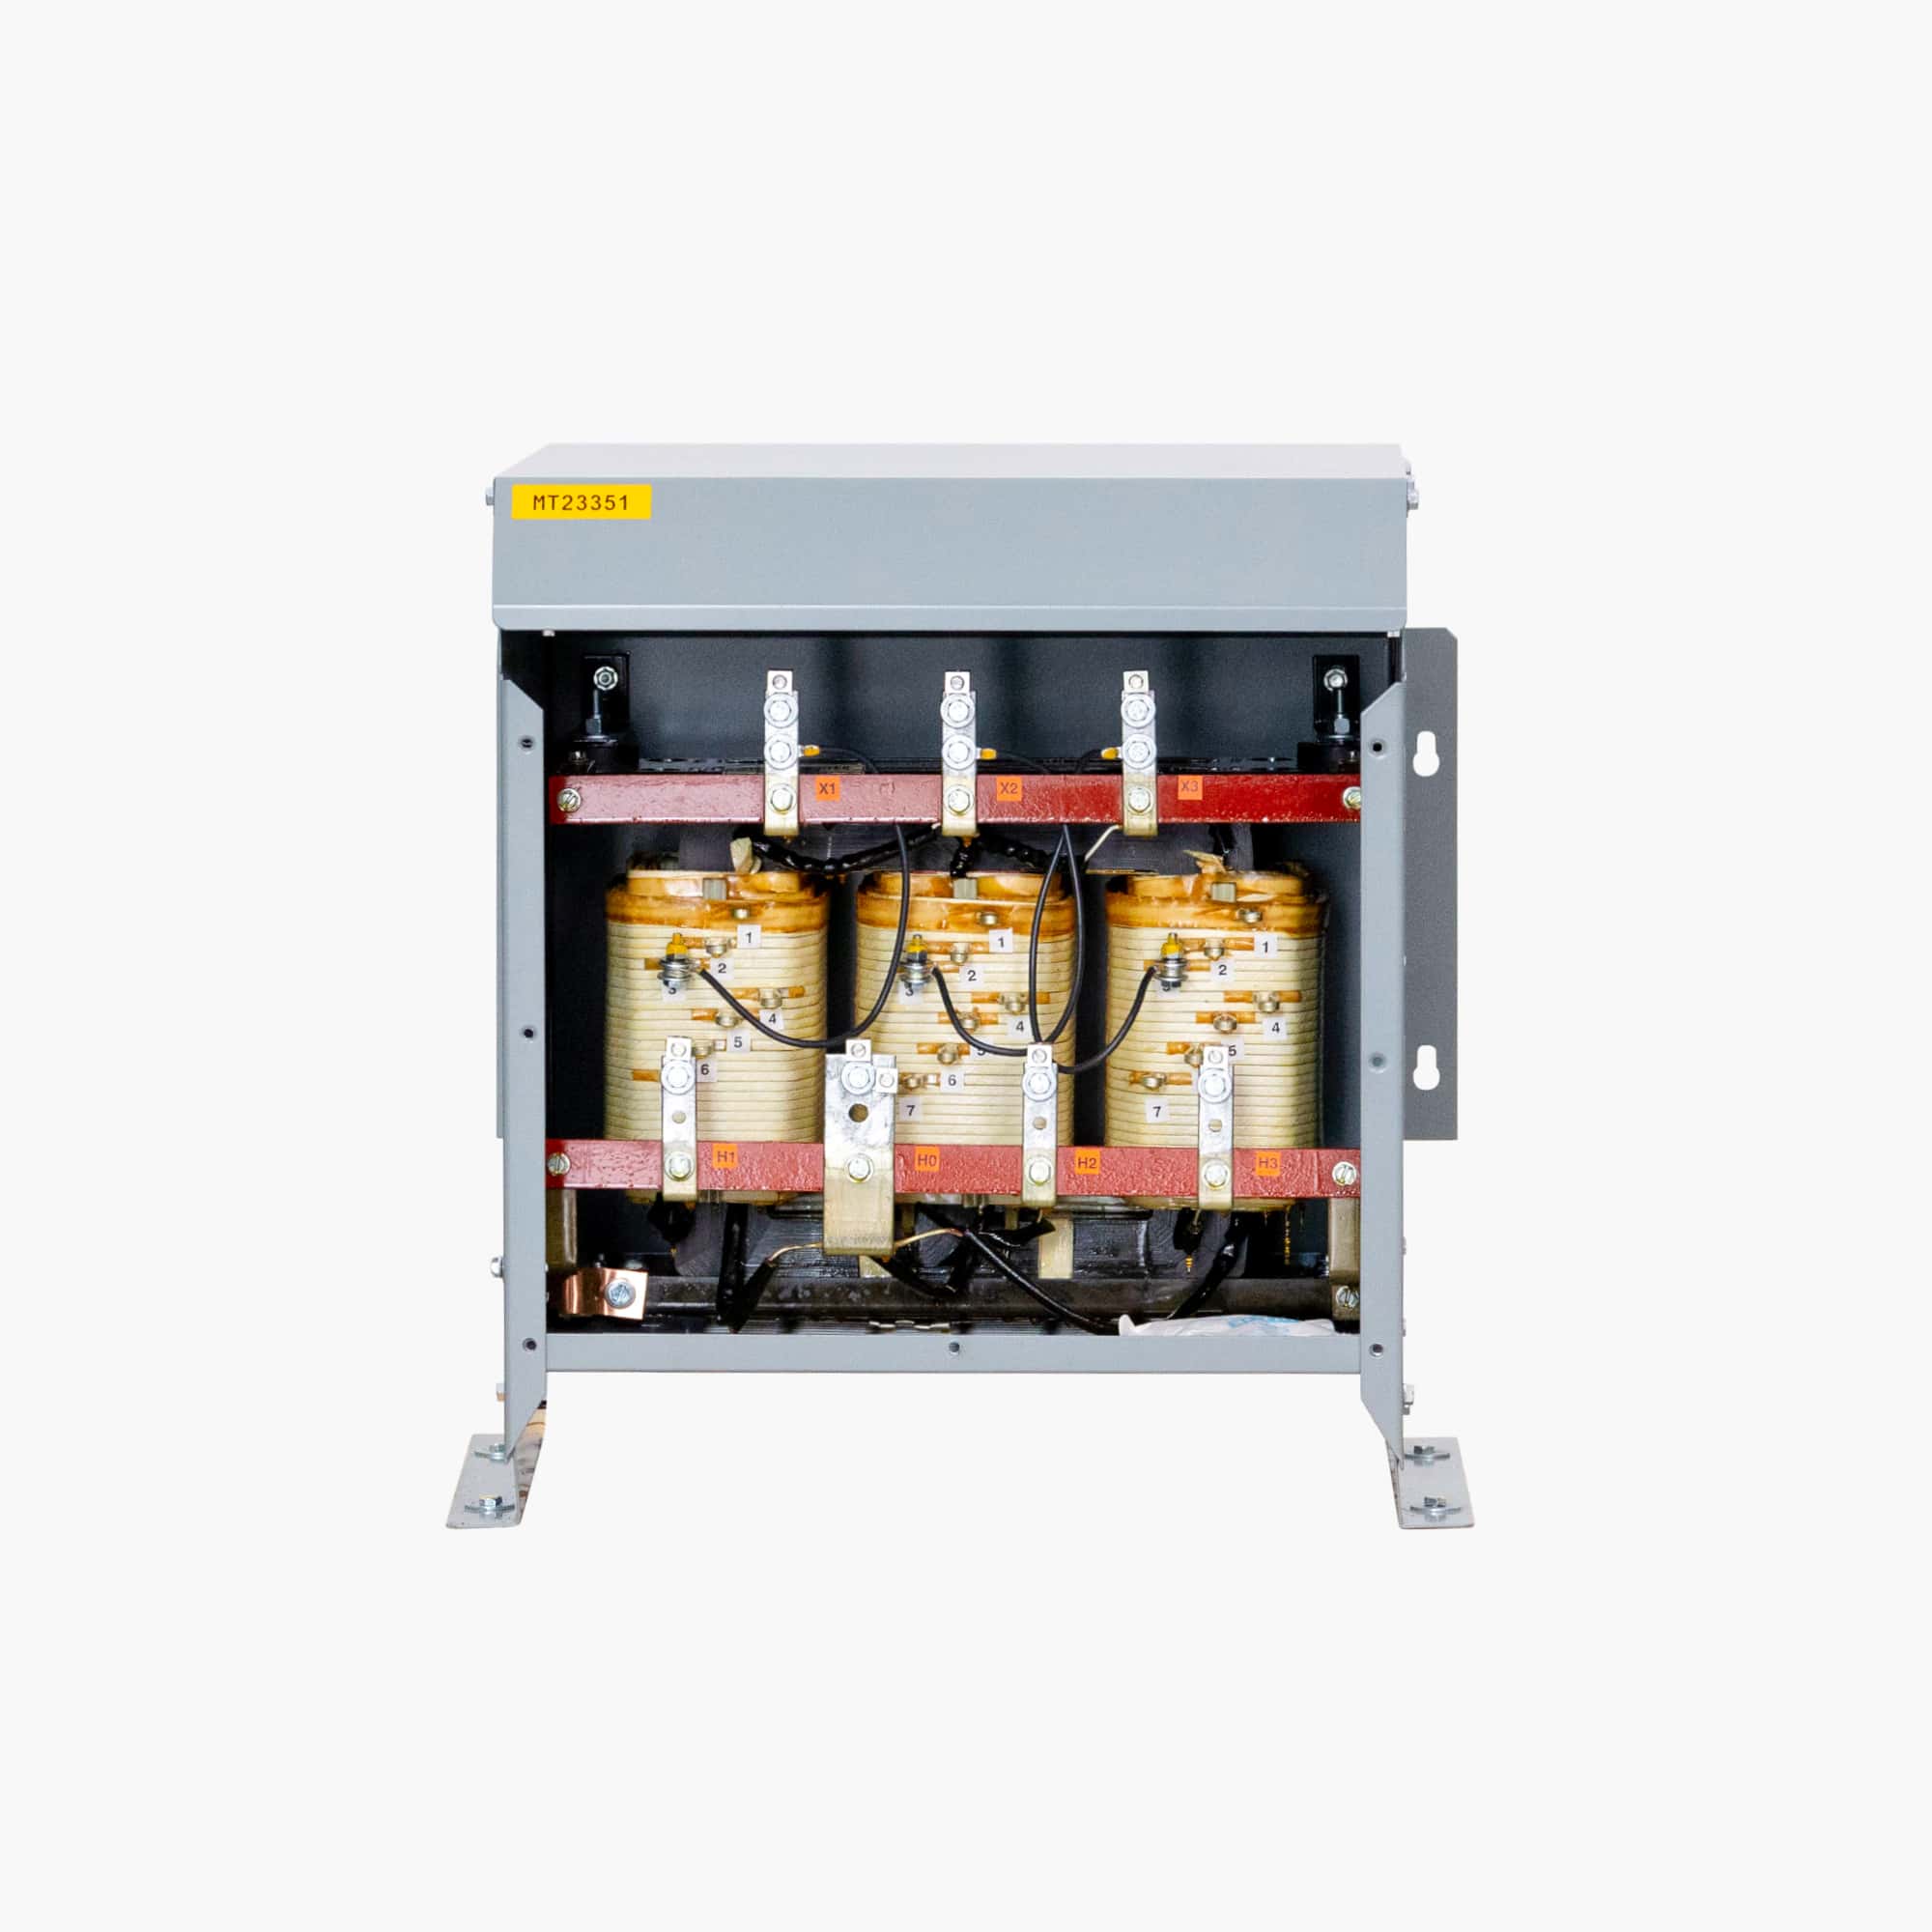 3-Phase 460 D - 230 Y 133 (Drive Isolation Transformer)